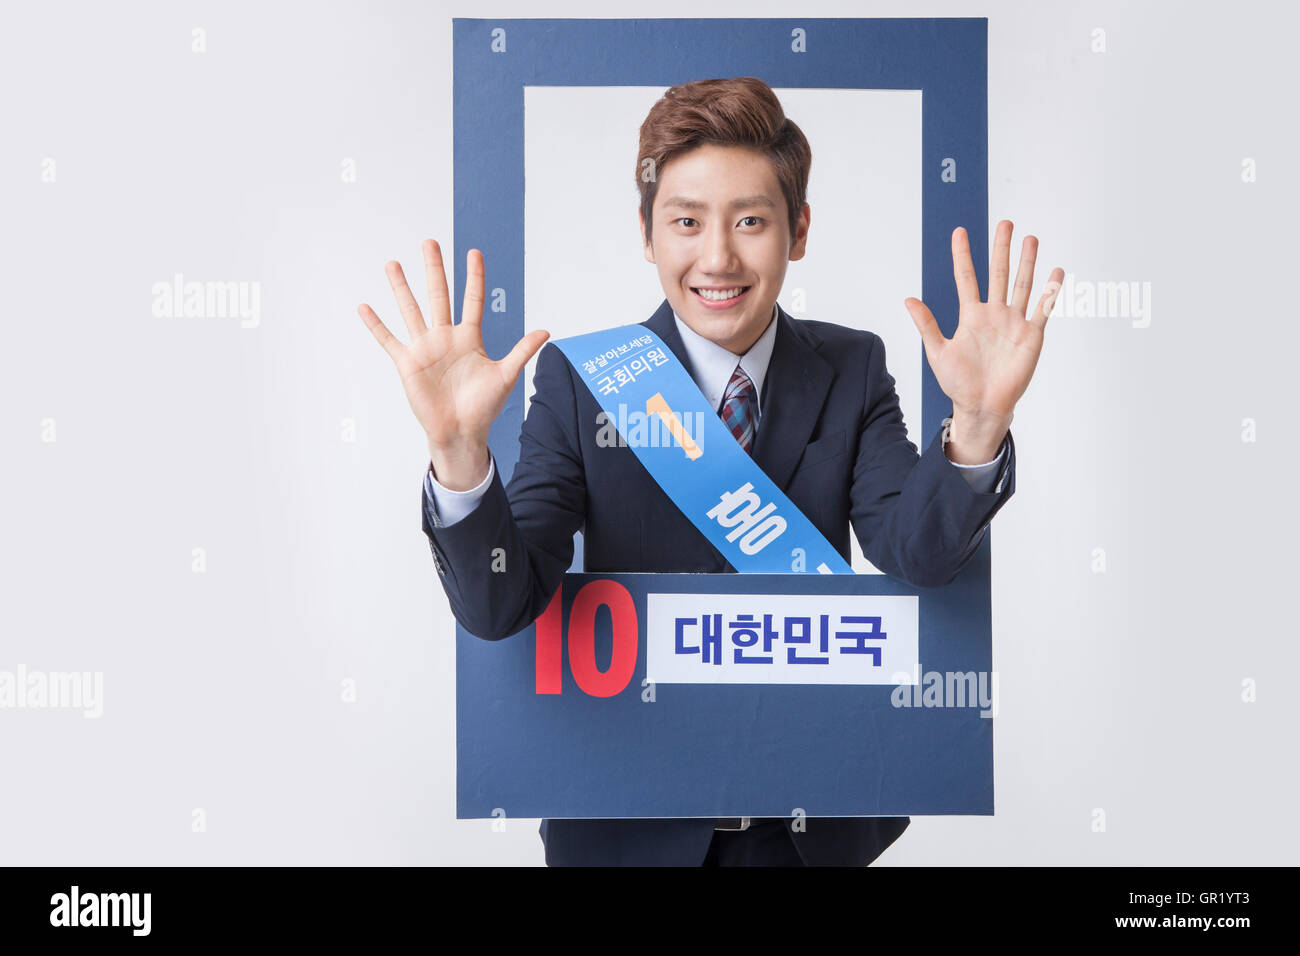 Portrait of young smiling candidate in suit waving hands on poster Stock Photo